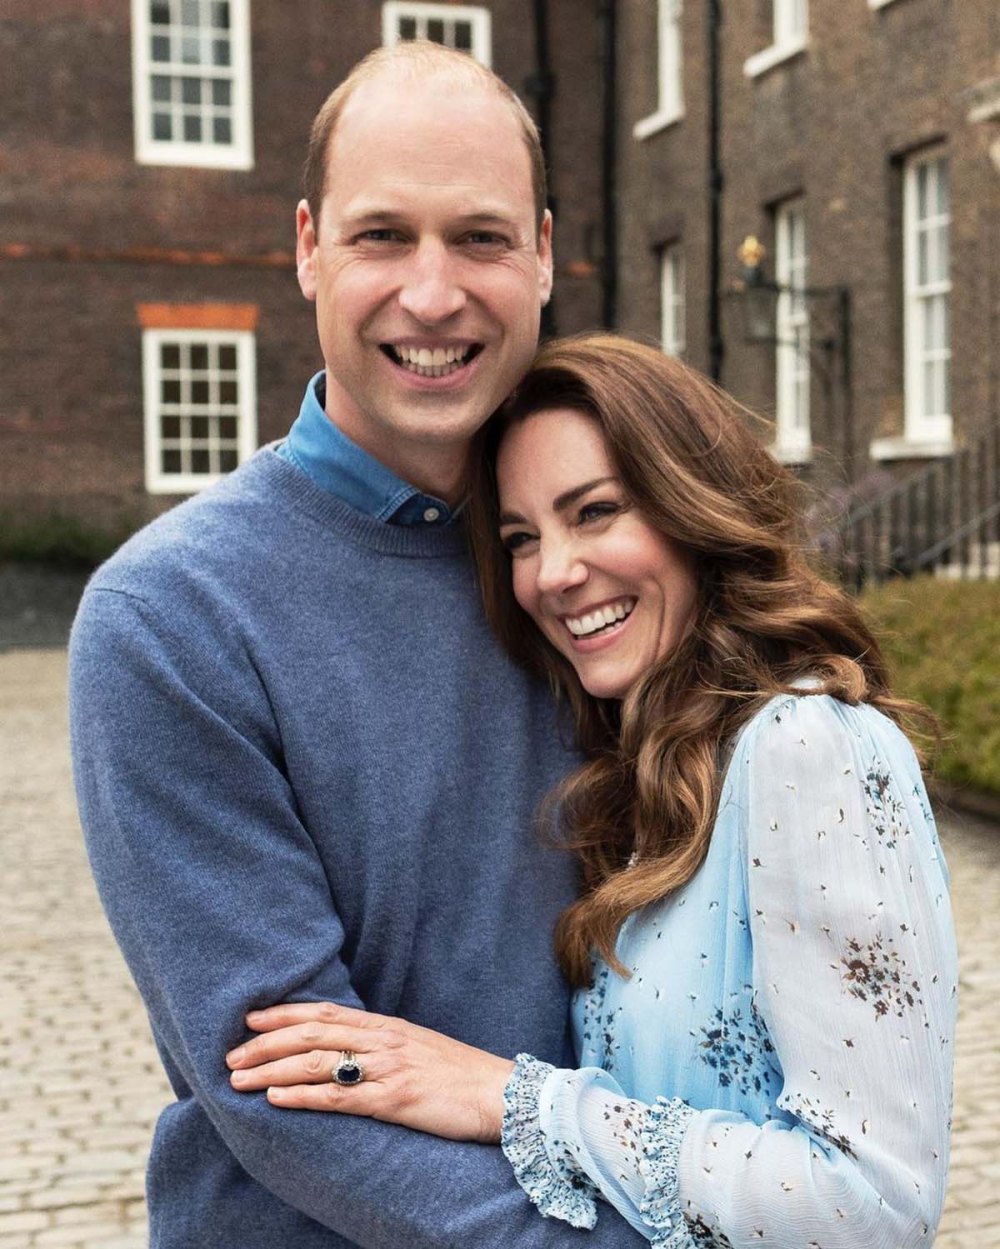 10 Years William Kate Are All Smiles New Anniversary Portrait